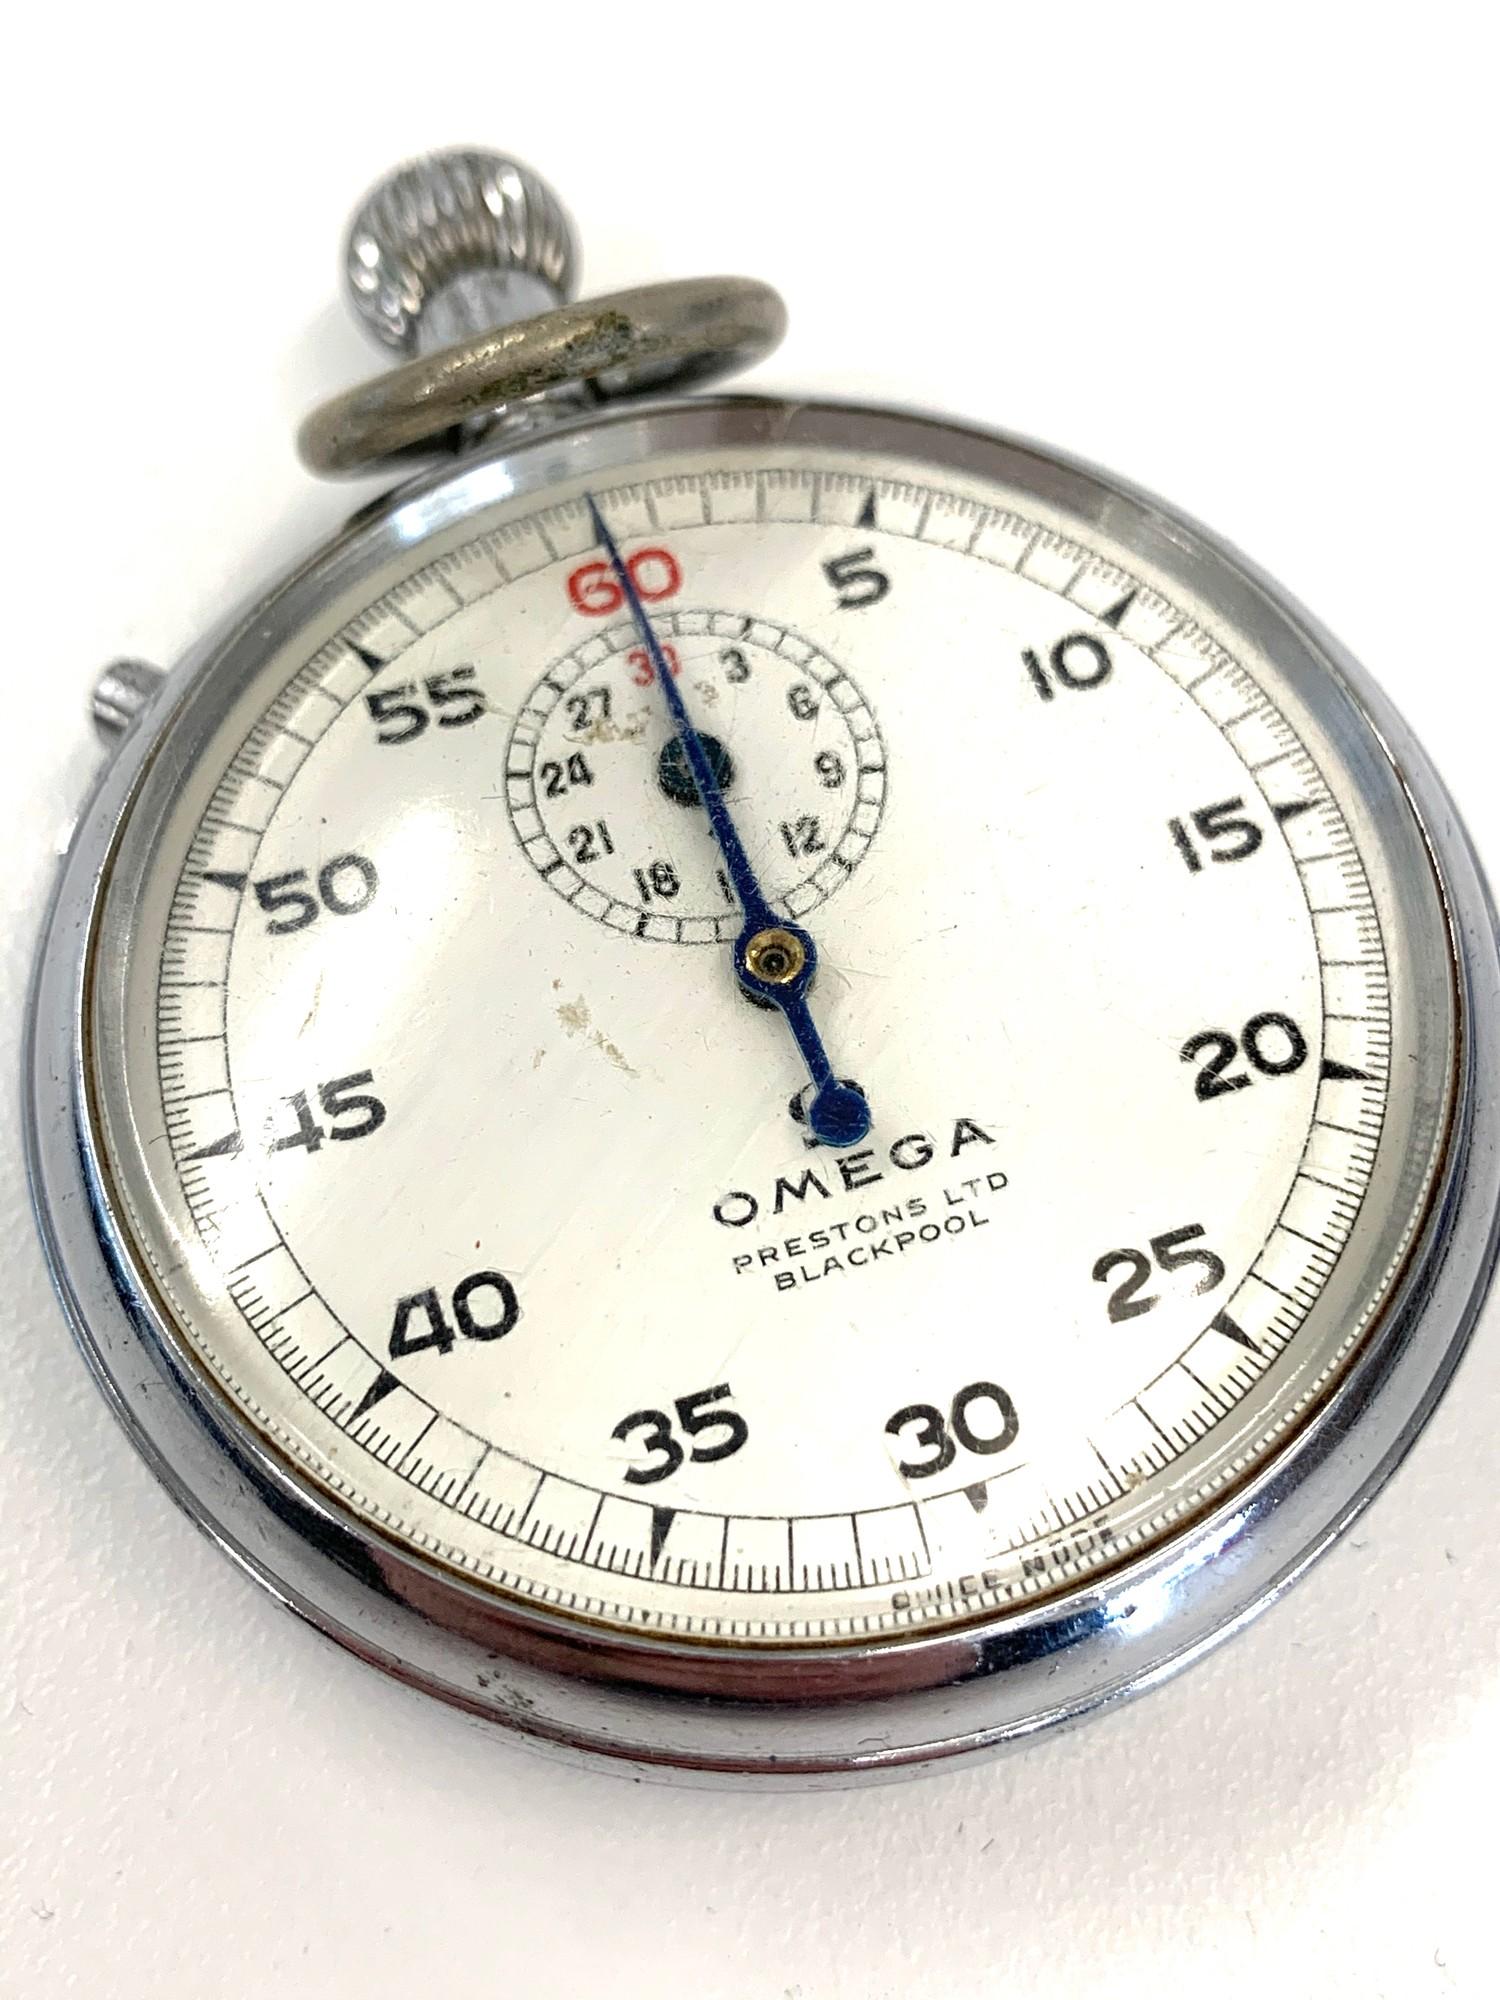 Vintage omega stop watch looks in good condition but is fully wound and not ticking please see - Image 3 of 3